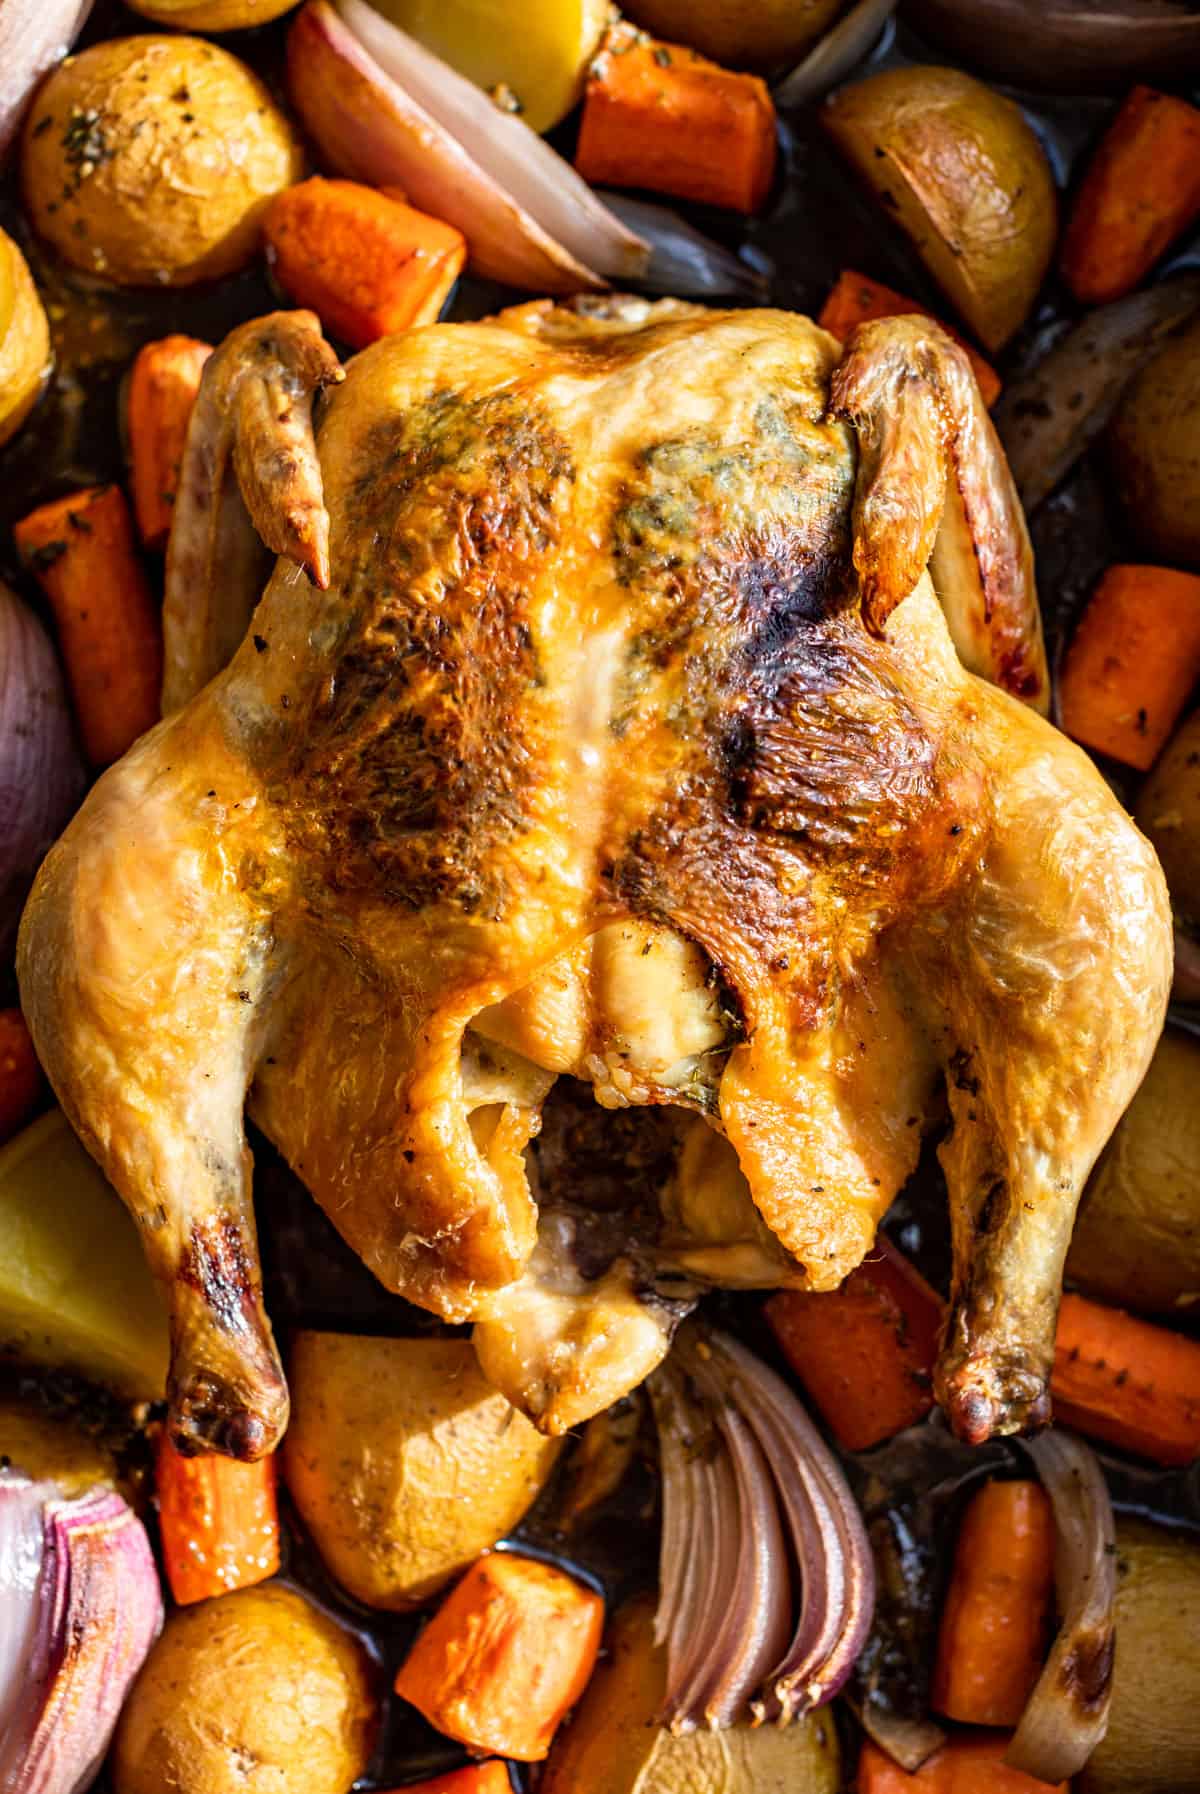 Close view of the whole Roasted Chicken with roasted potatoes, carrots, and onions around it.